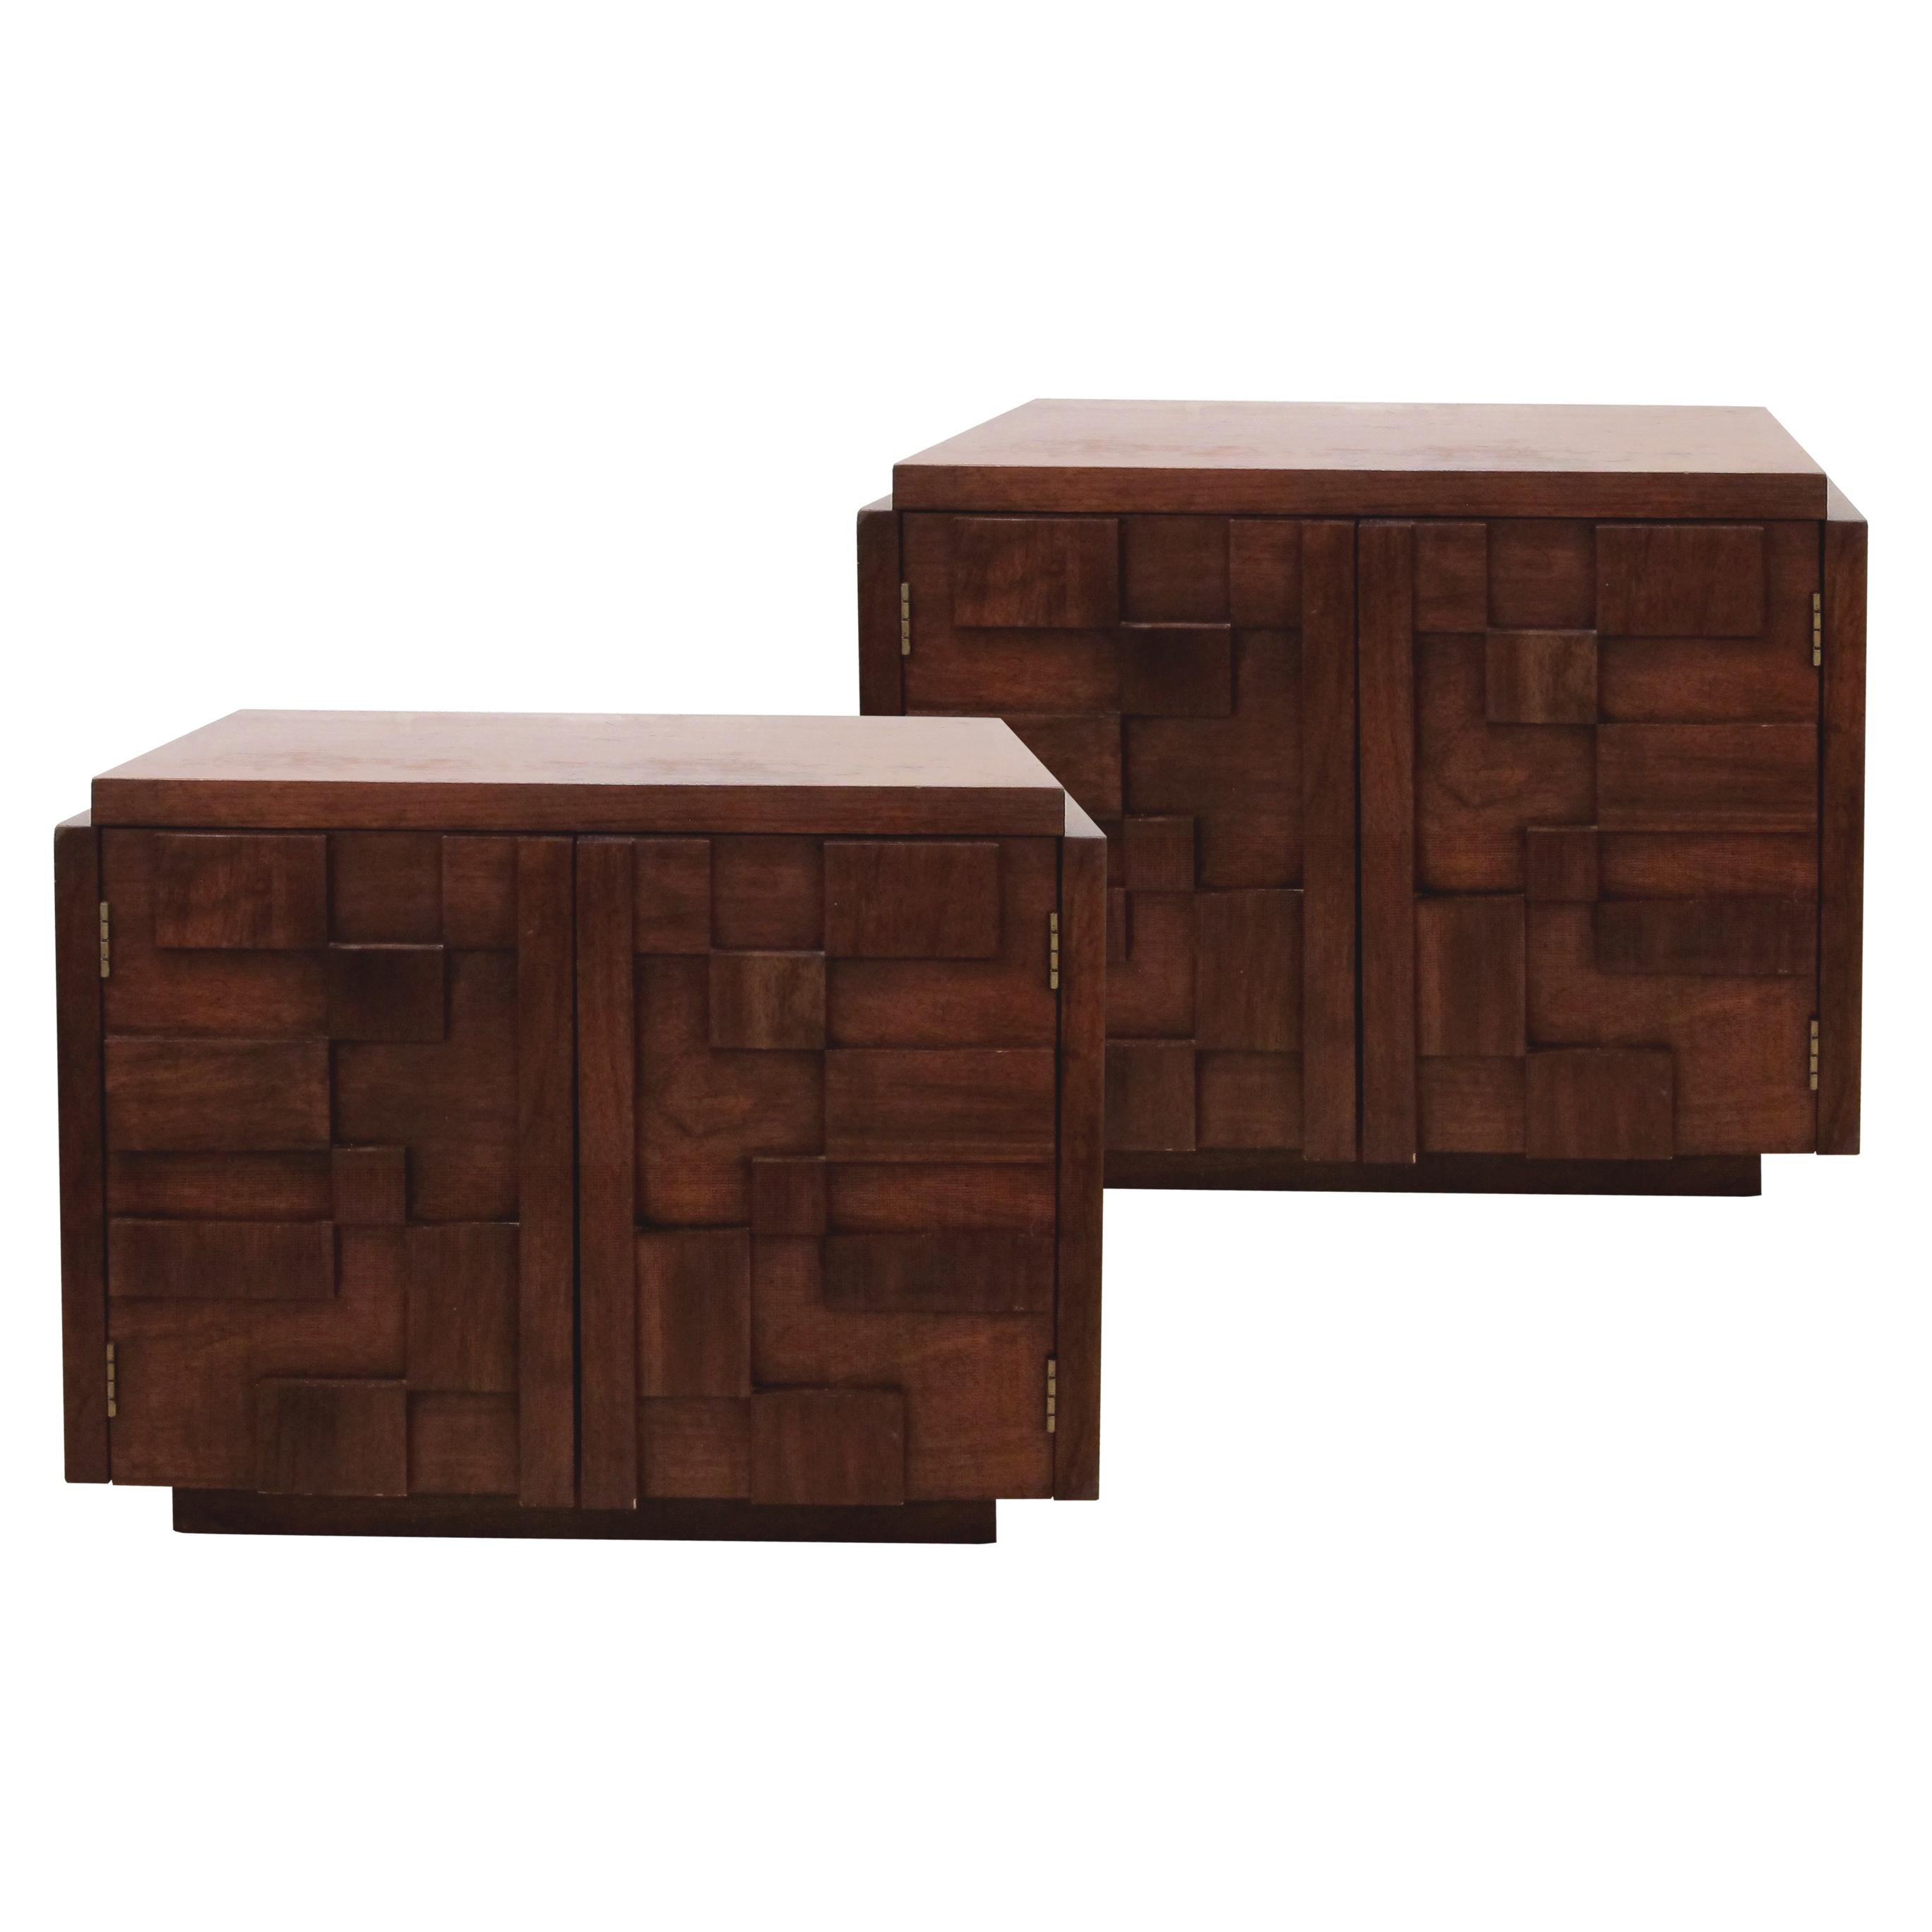 1960s American well-made pair of staccato bedside tables by Lane in the style of Paul Evans. 
The bedside/end tables are boasting a very elegant geometric design with soft curves and angles, each table has a central shelve. 
These tables are